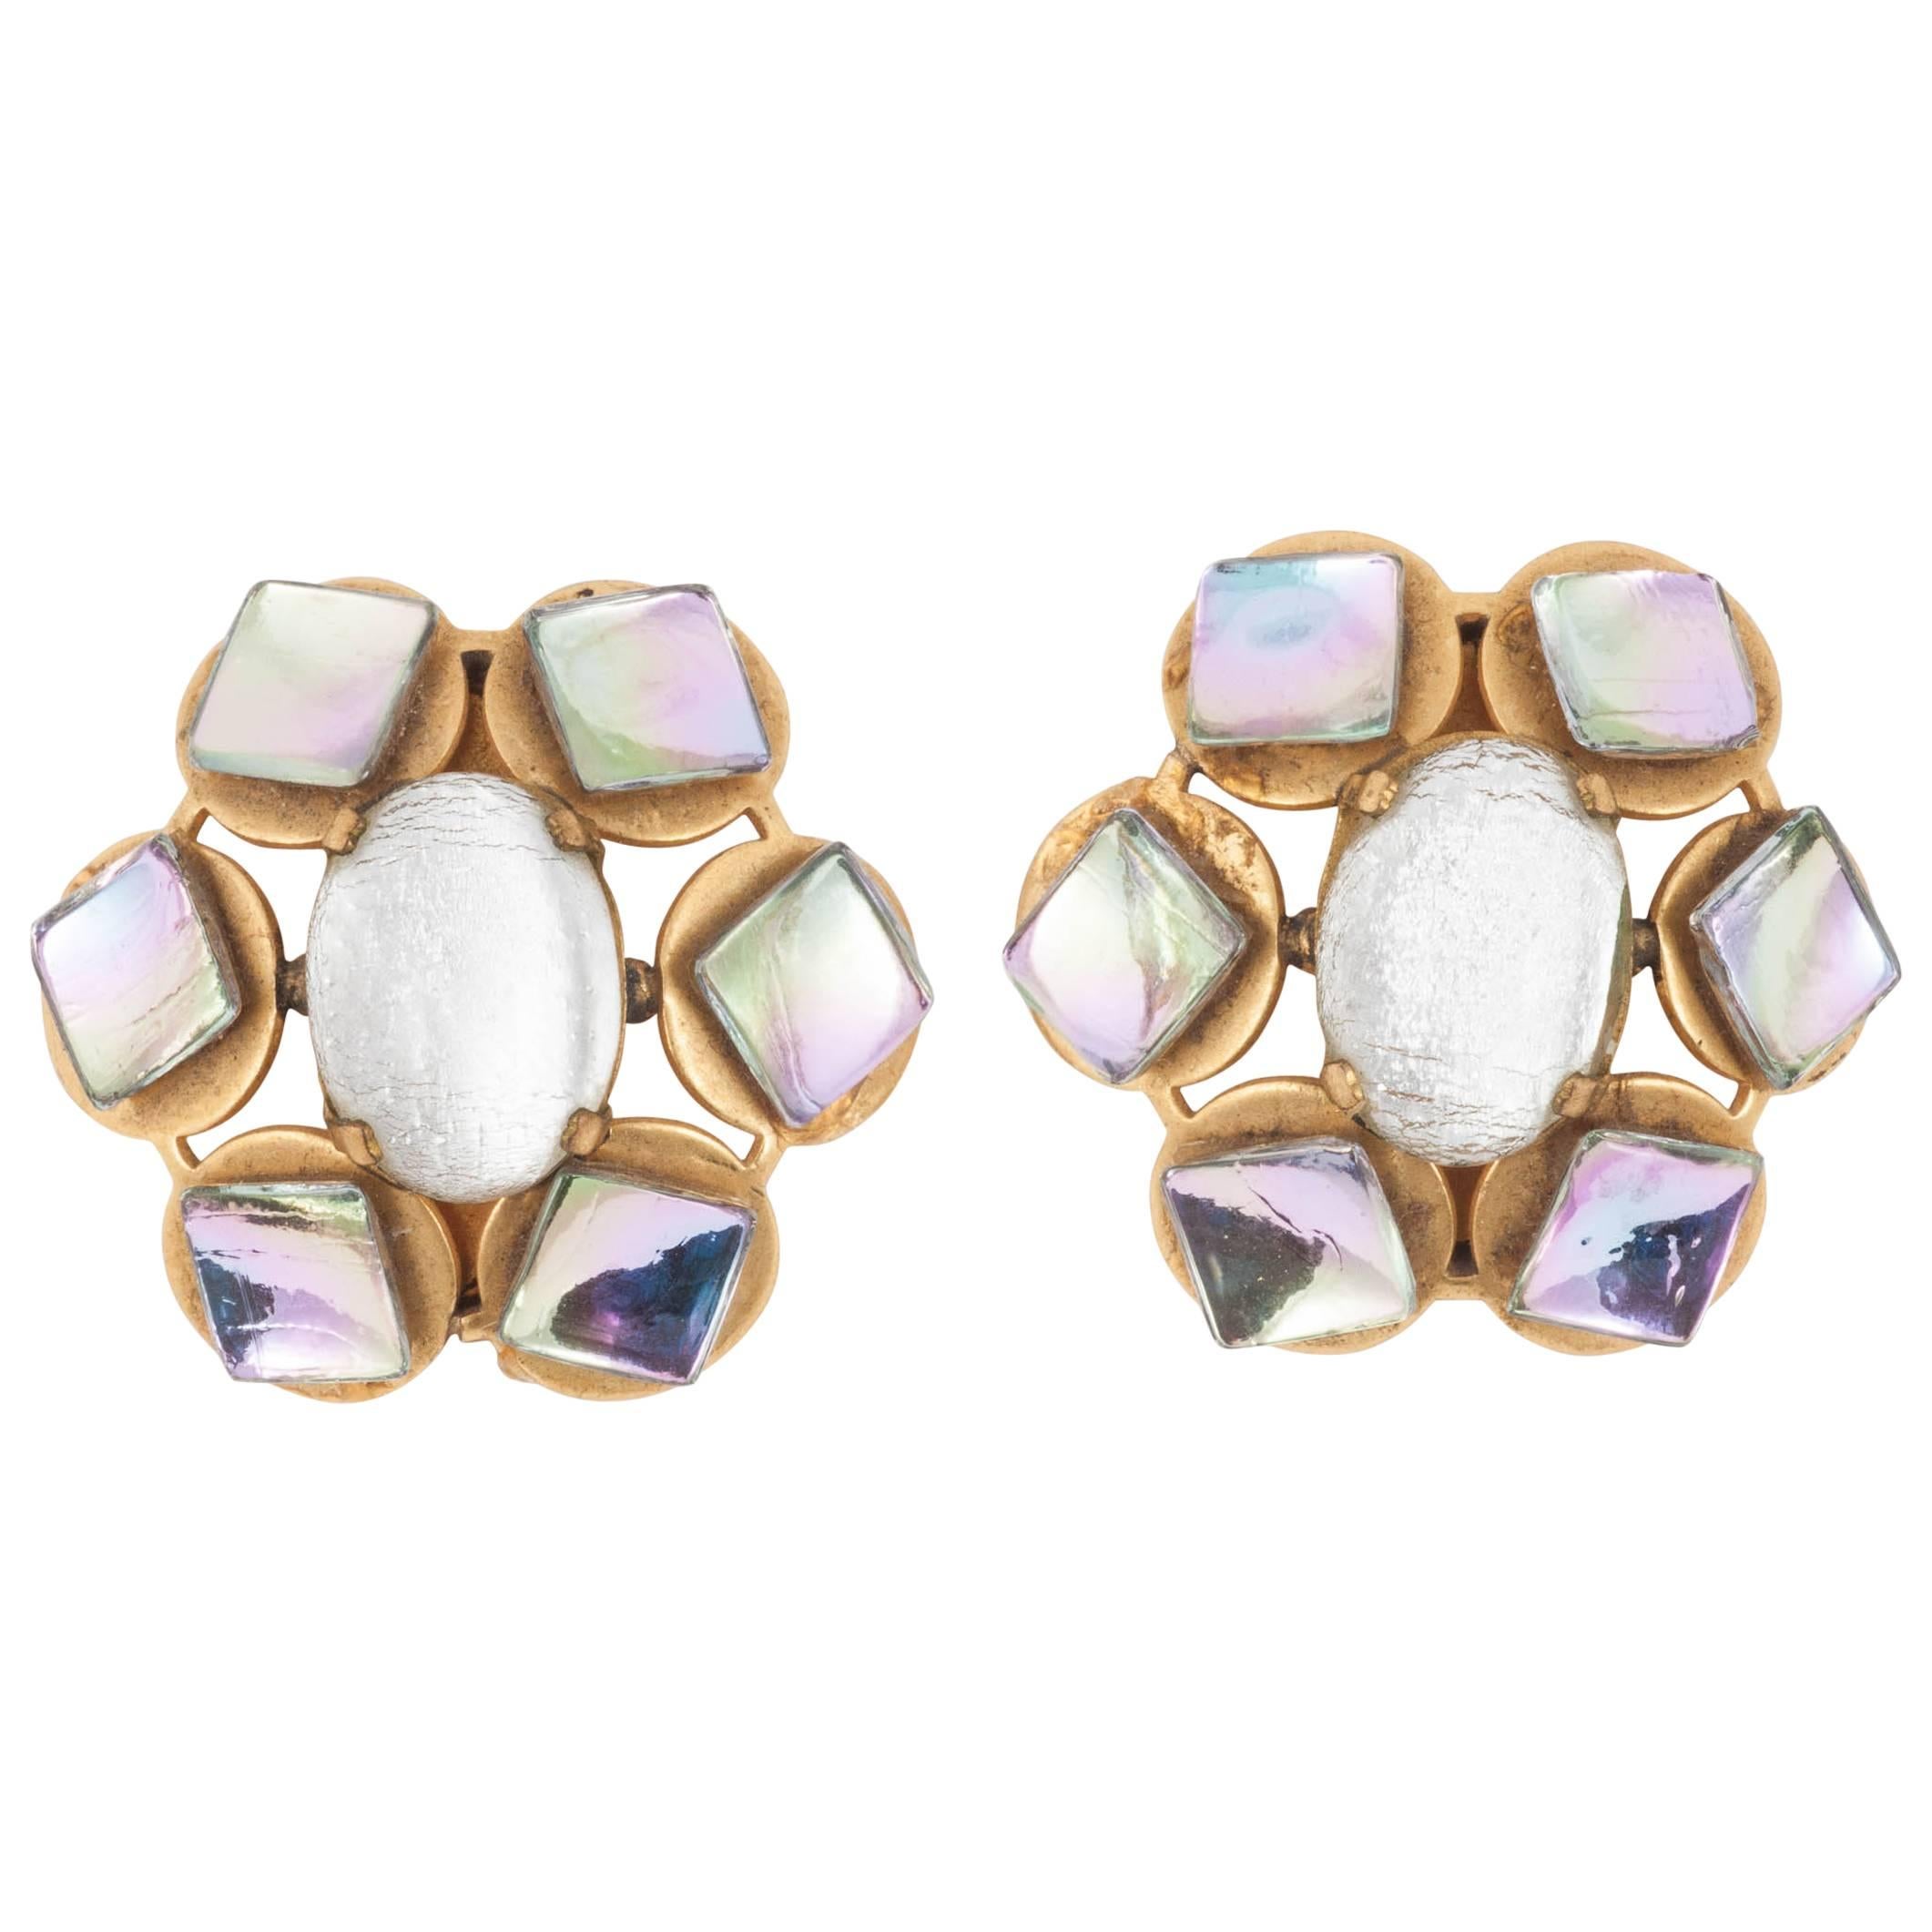  Large opalescent glass and gilt metal earrings, French, 1960s For Sale